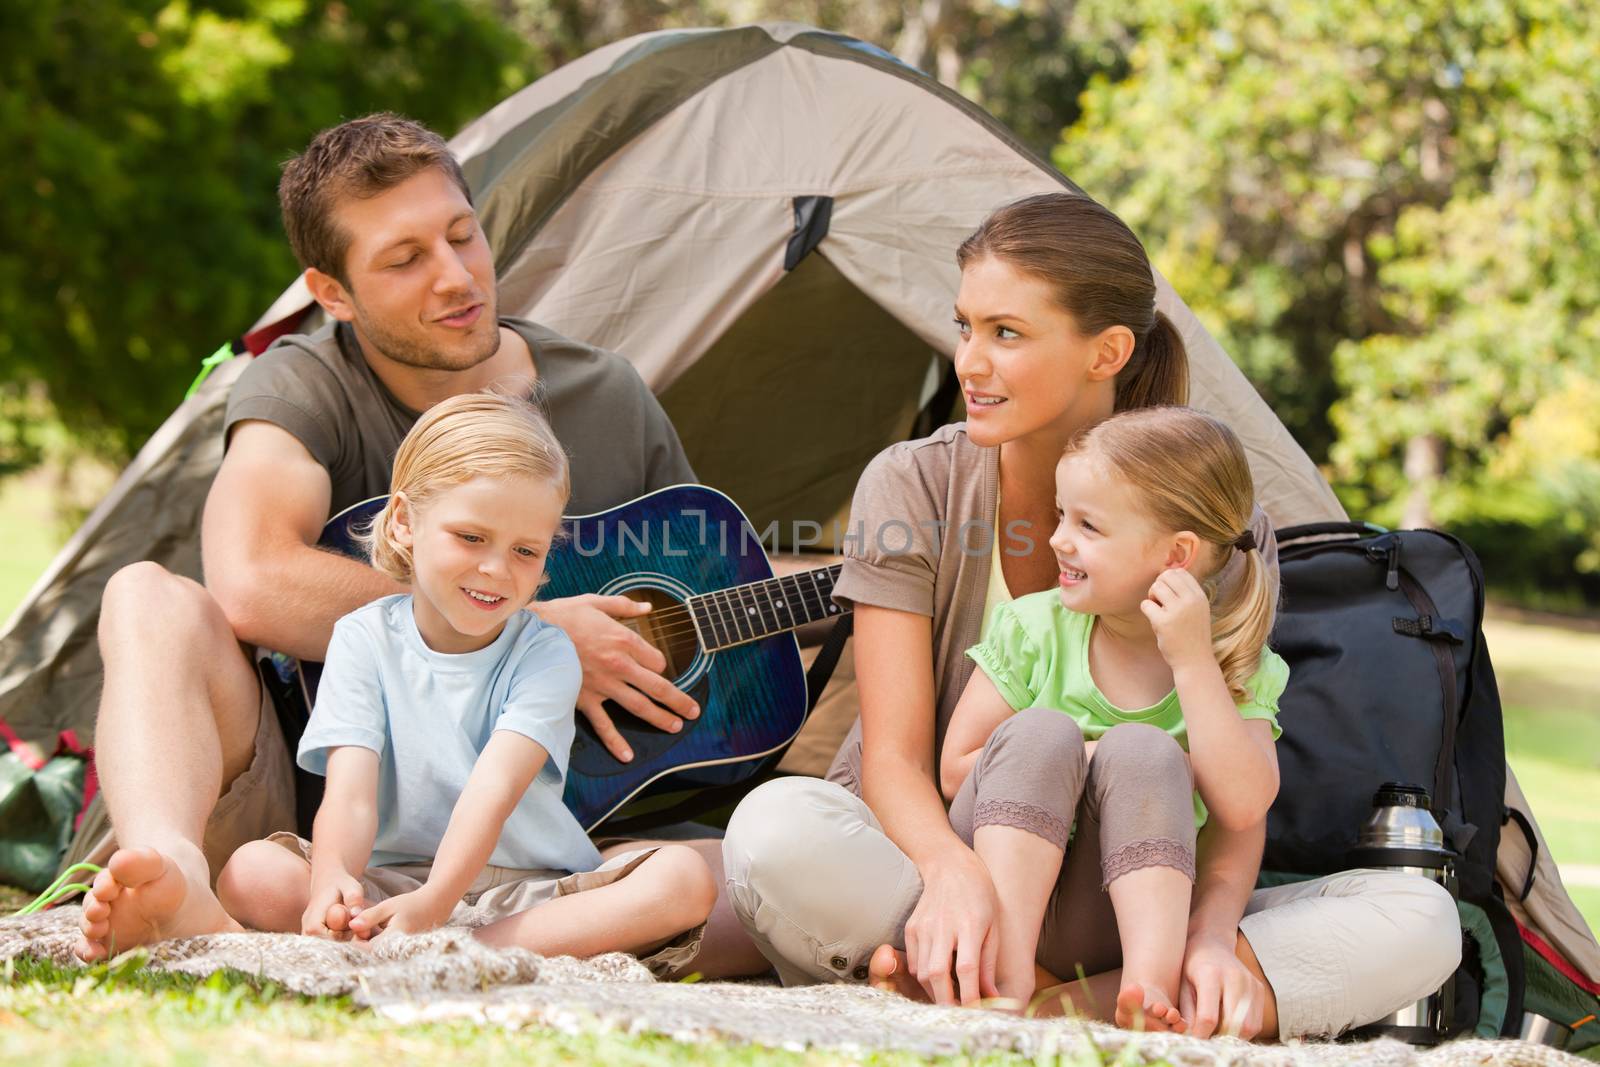 Family camping in the park during the summer